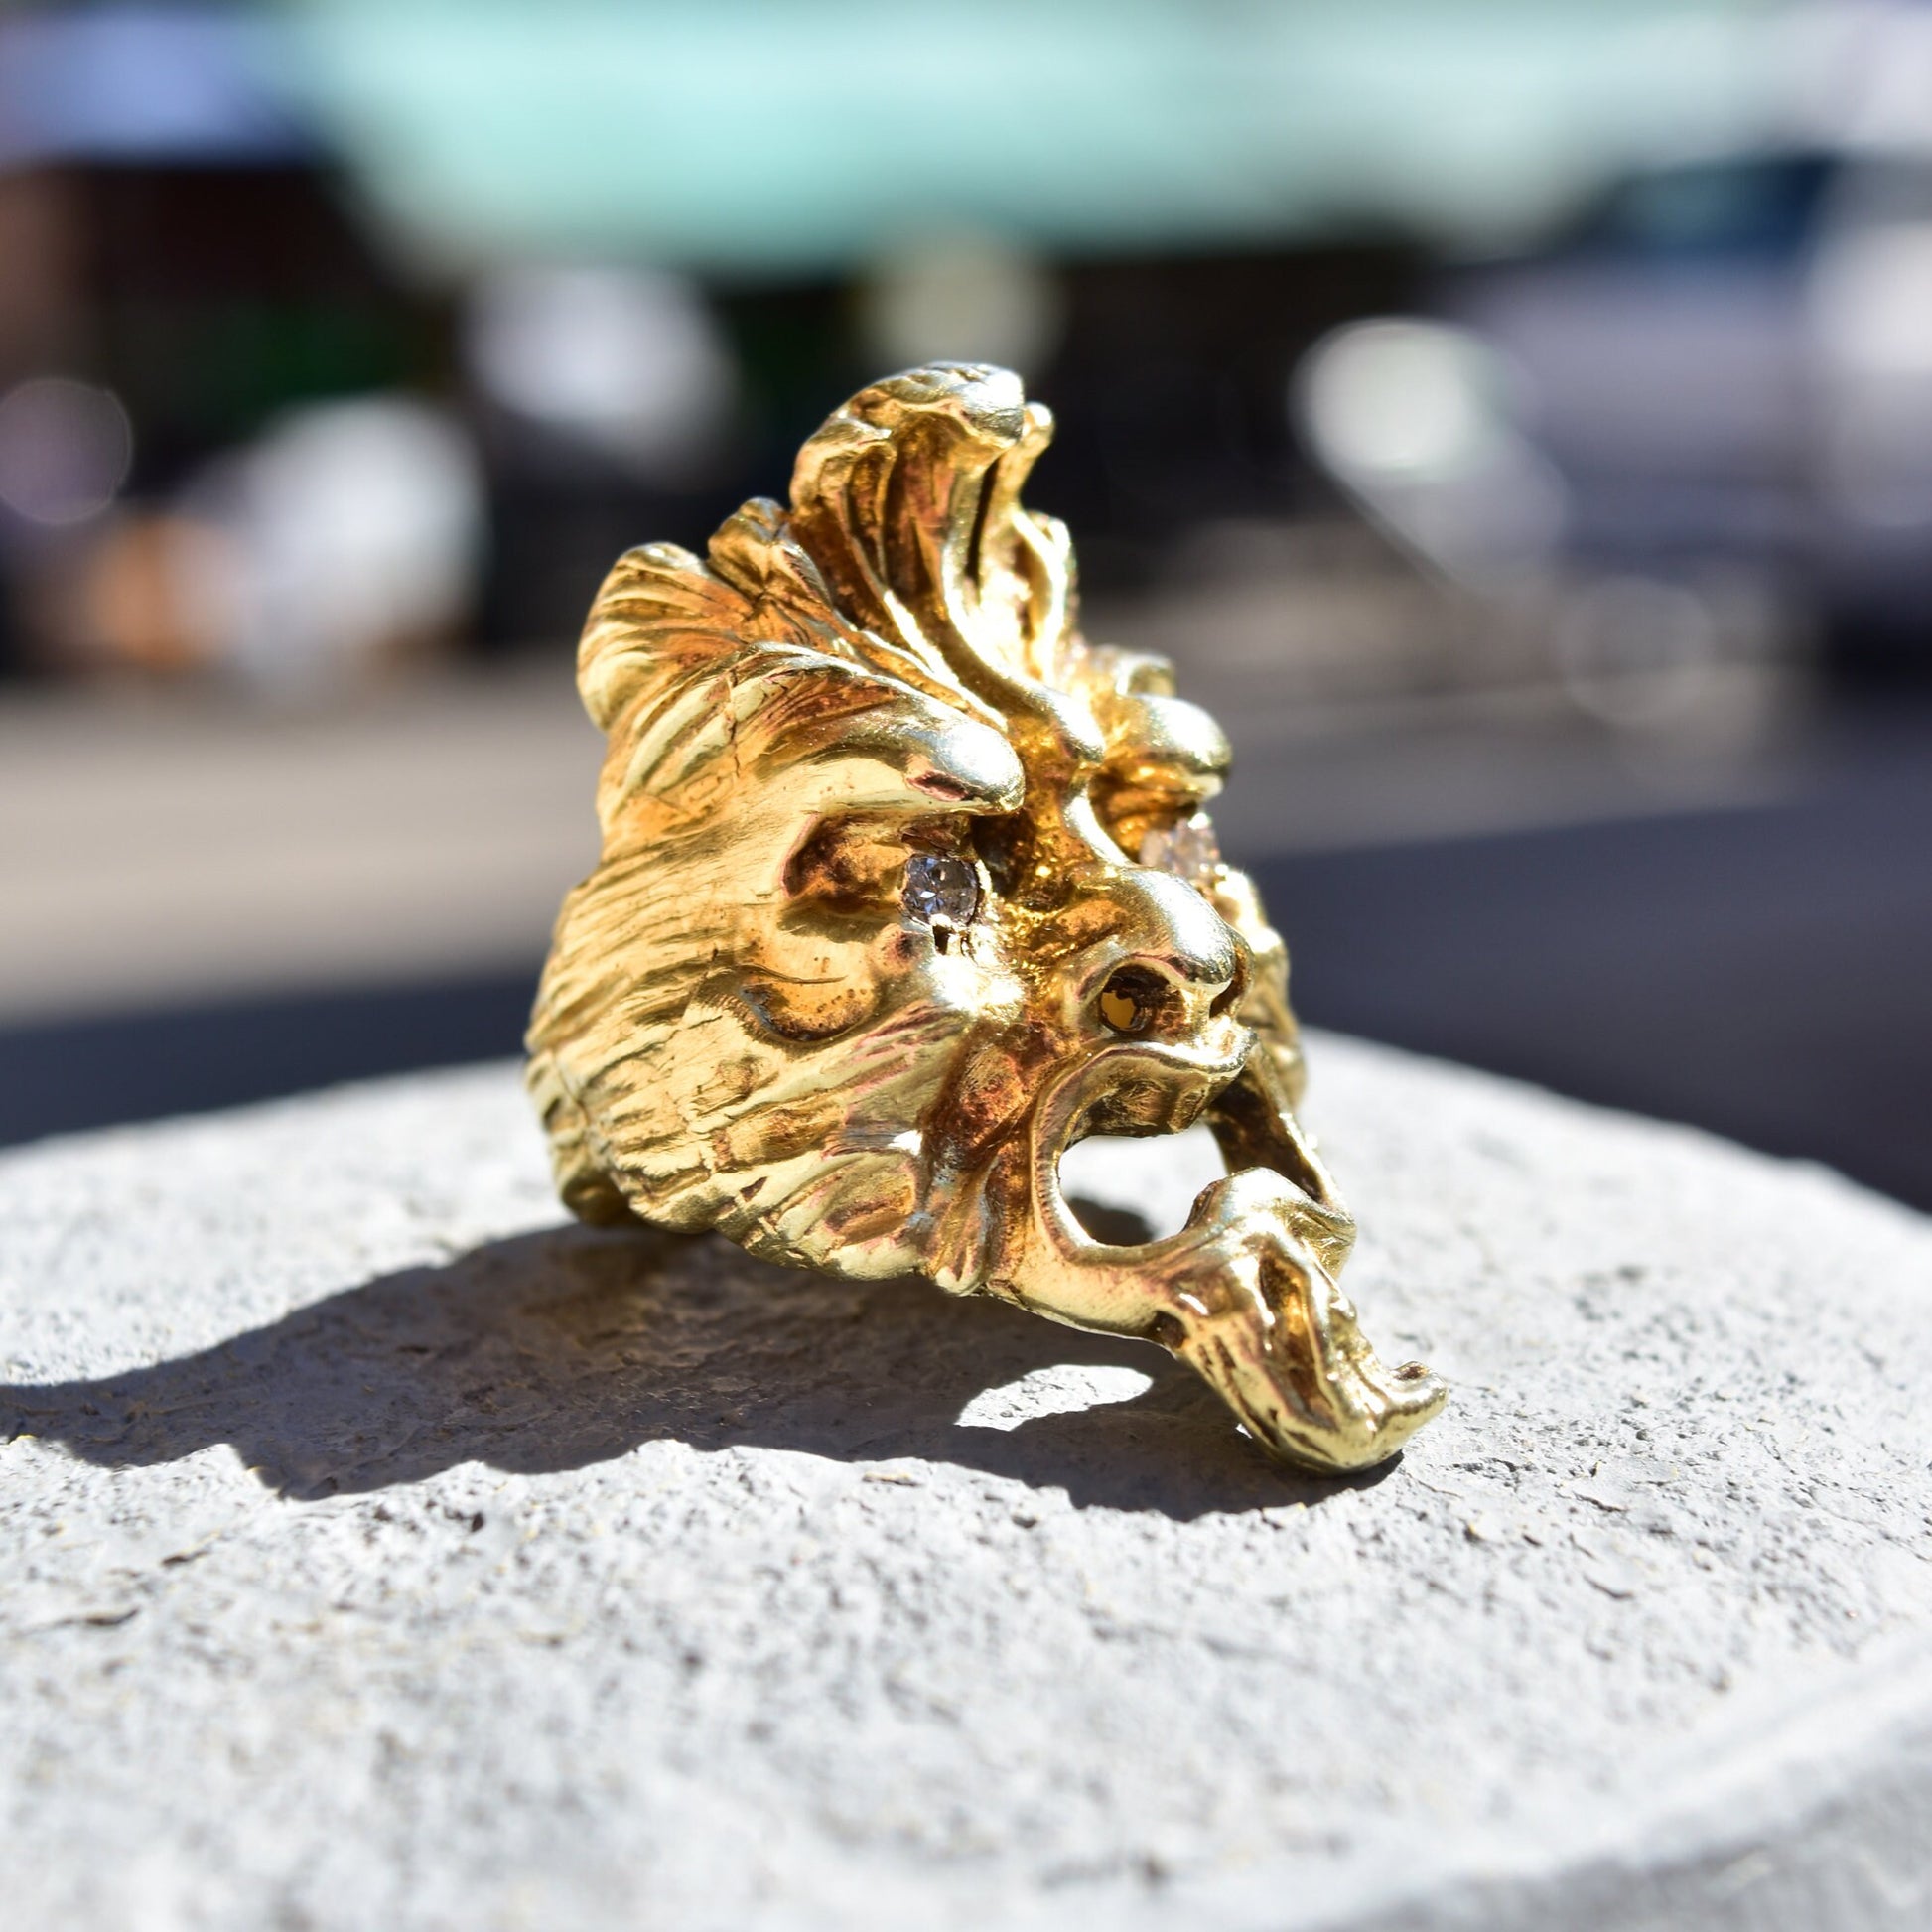 Gold sculpted face ring with diamond eye detail on concrete surface